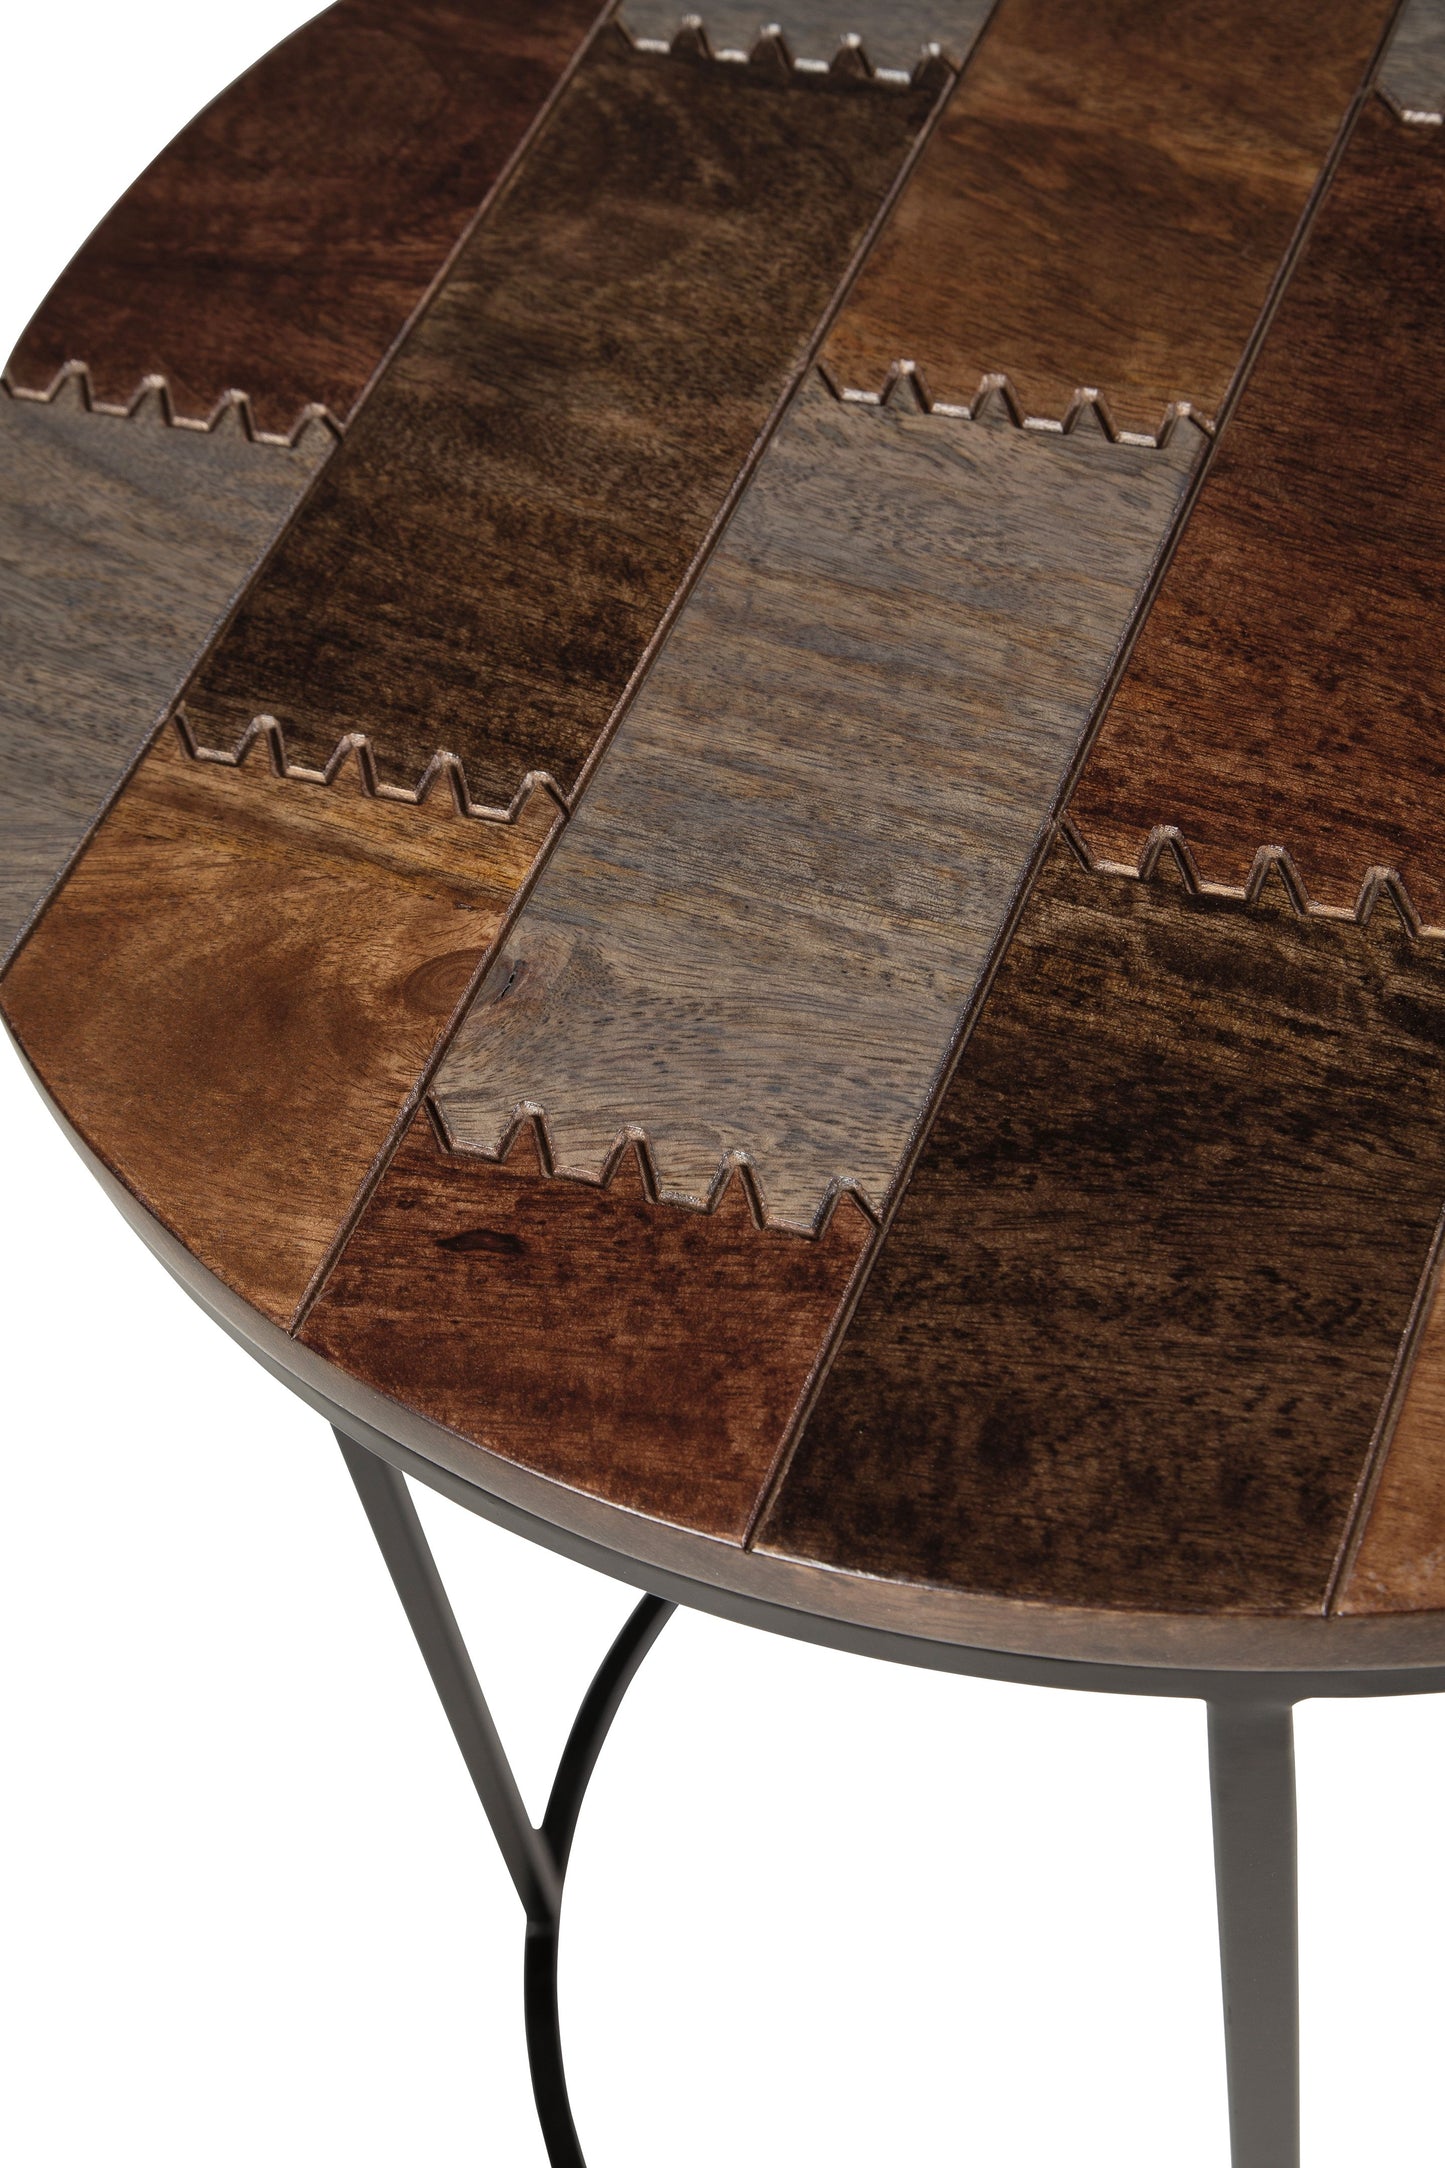 Allieton - Multi Brown - Accent Table (Set of 2)